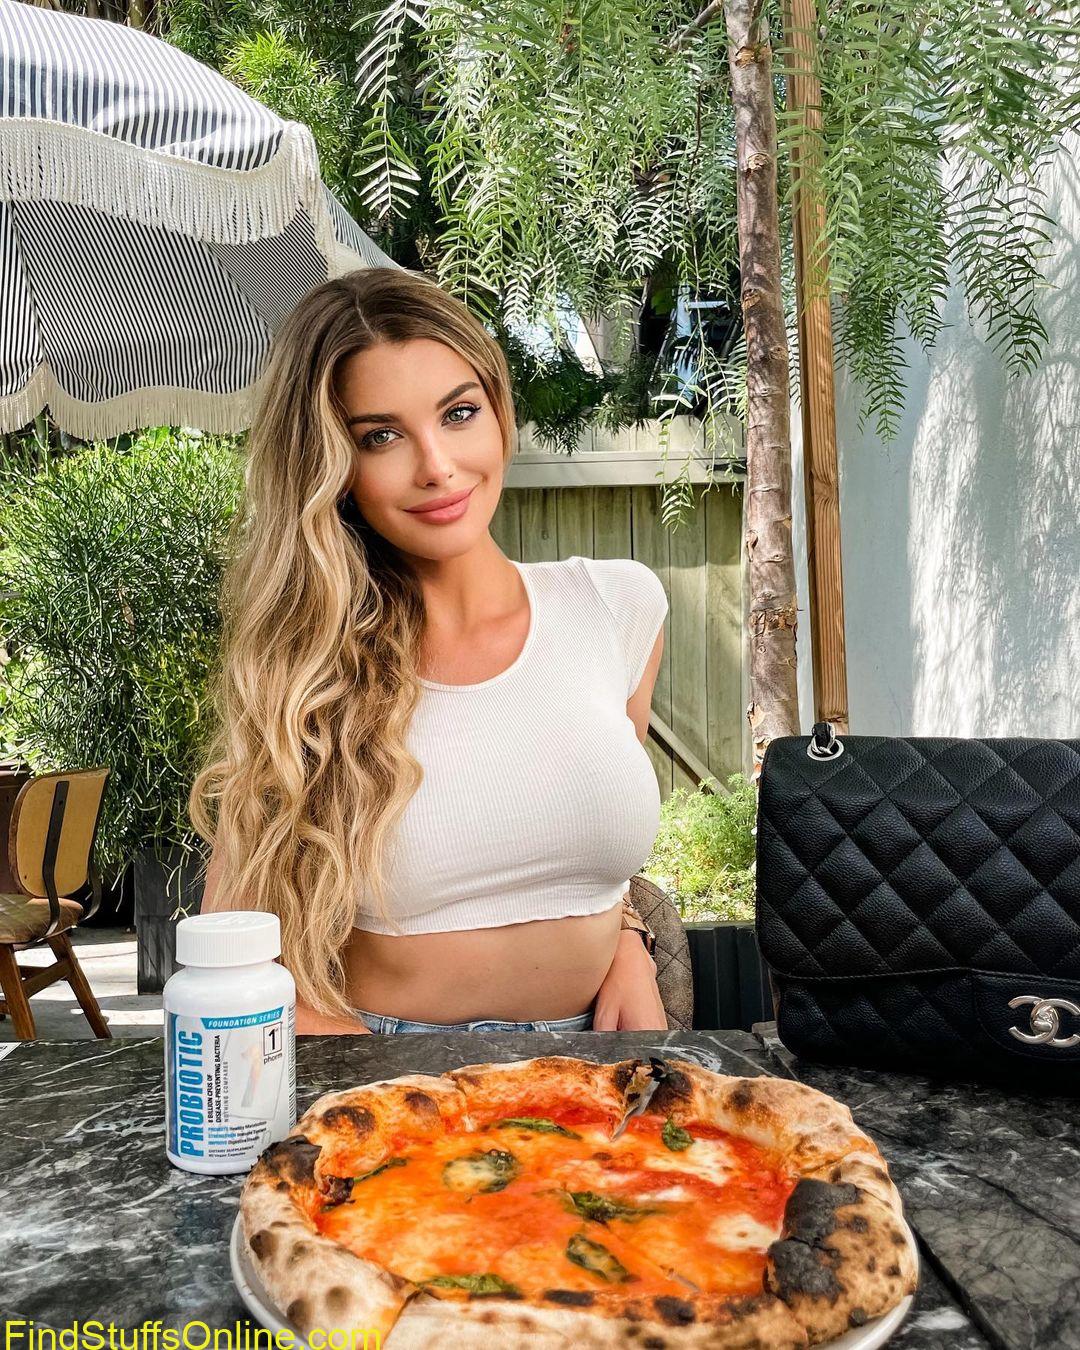 emily sears instagram hot images 14